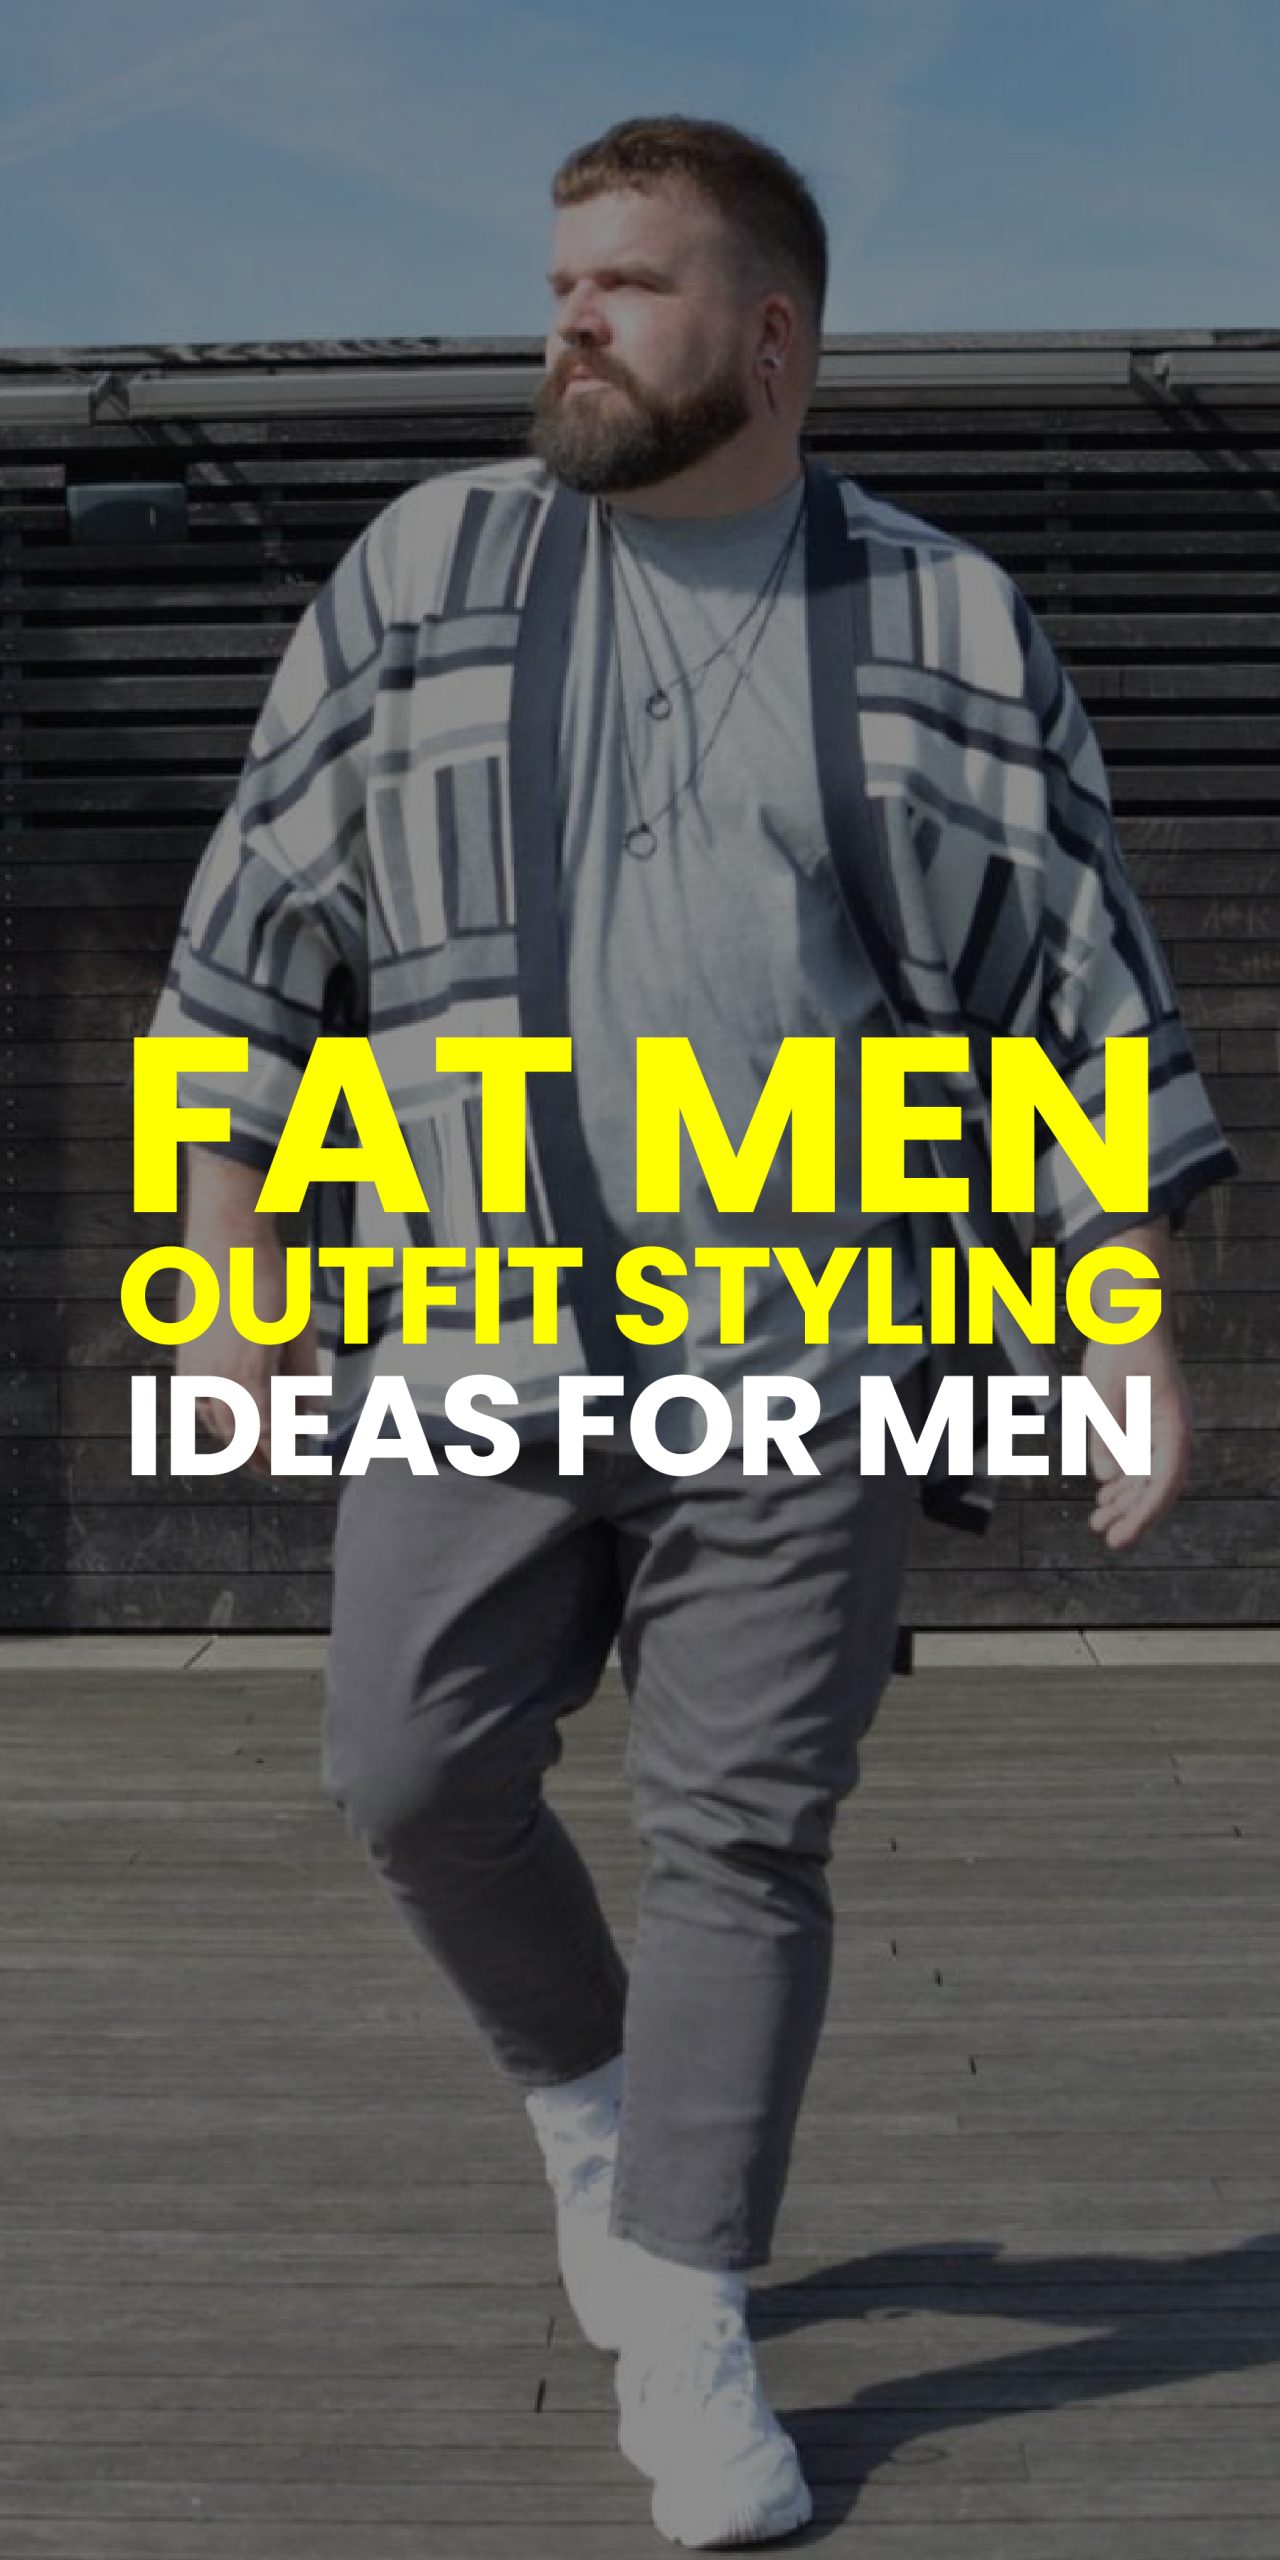 FAT MEN OUTFIT STYLING IDEAS FOR MEN